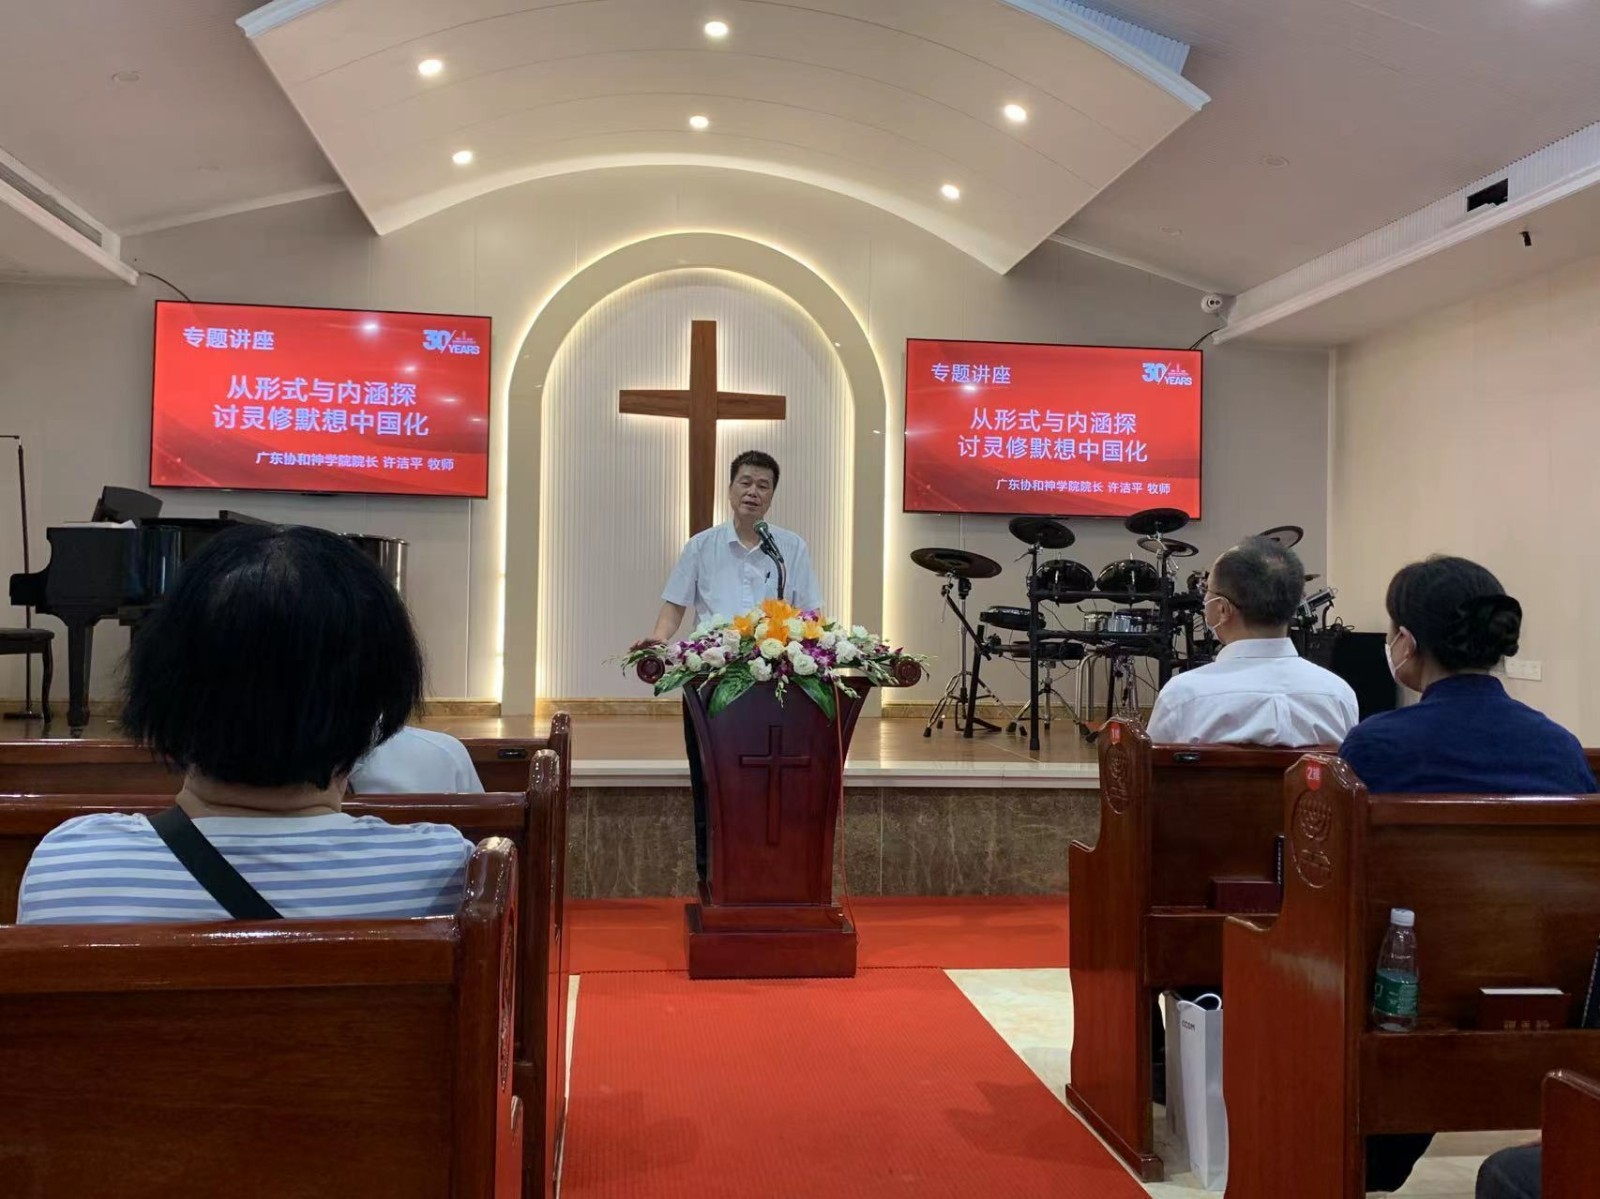 Rev. Xu Jieping, president of Guangdong Union Theological Seminary, gave a seminar to mark the 30th anniversary of the reopening of Shamian Church in Guangzhou, Guangdong, on June 25, 2022.